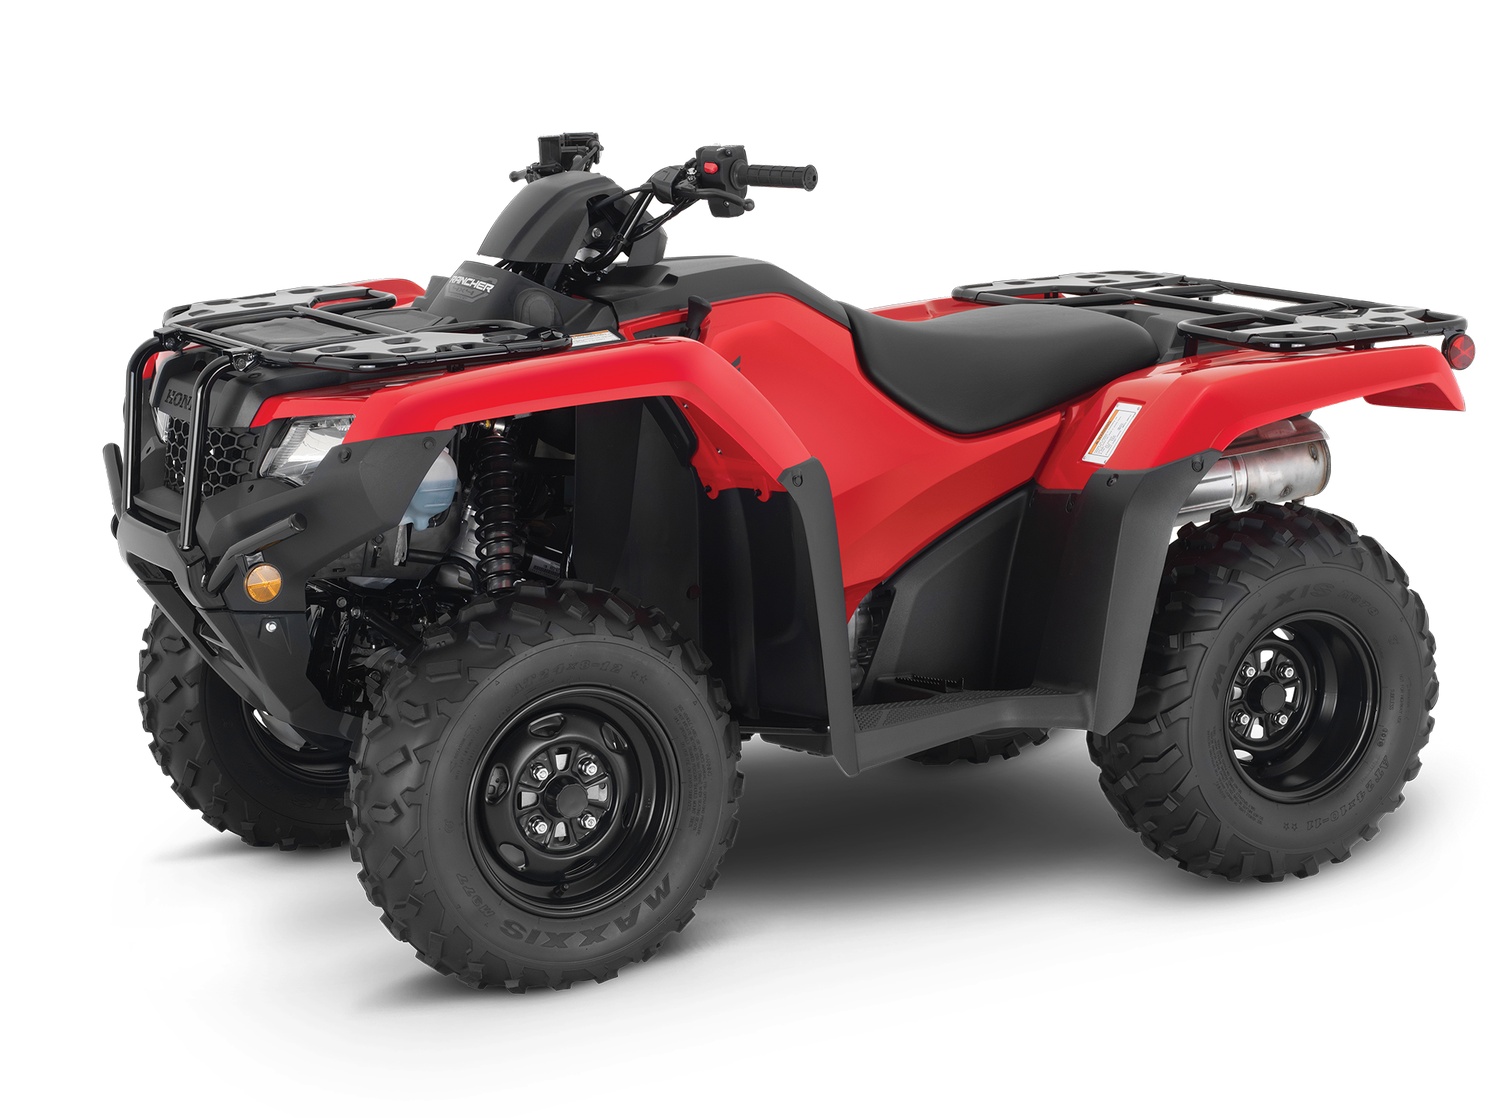 2023 Honda TRX420 RANCHER - PRE-ORDER YOURS NOW!!